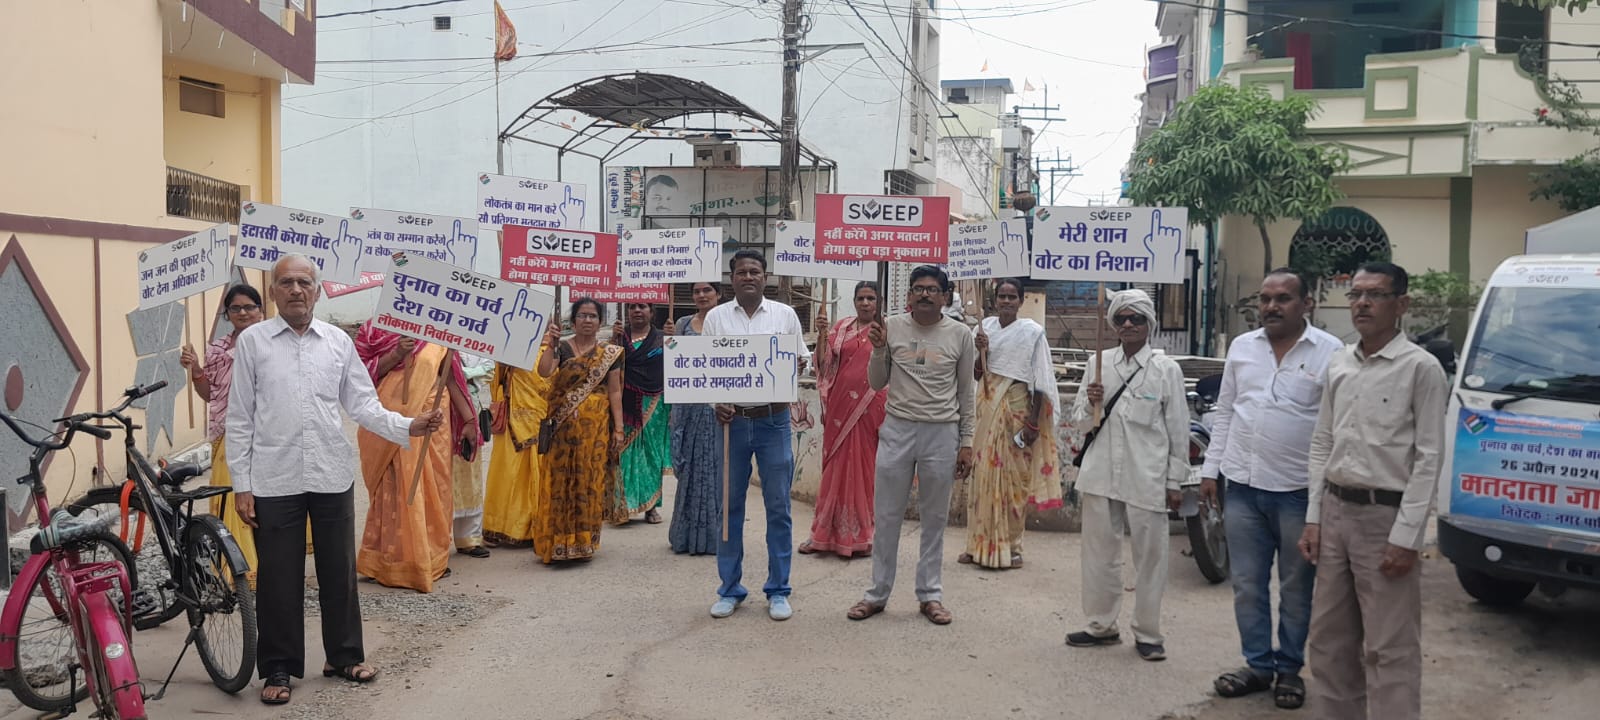 Narmadapuram News: Voter awareness rally conducted in wards to increase voting percentage.